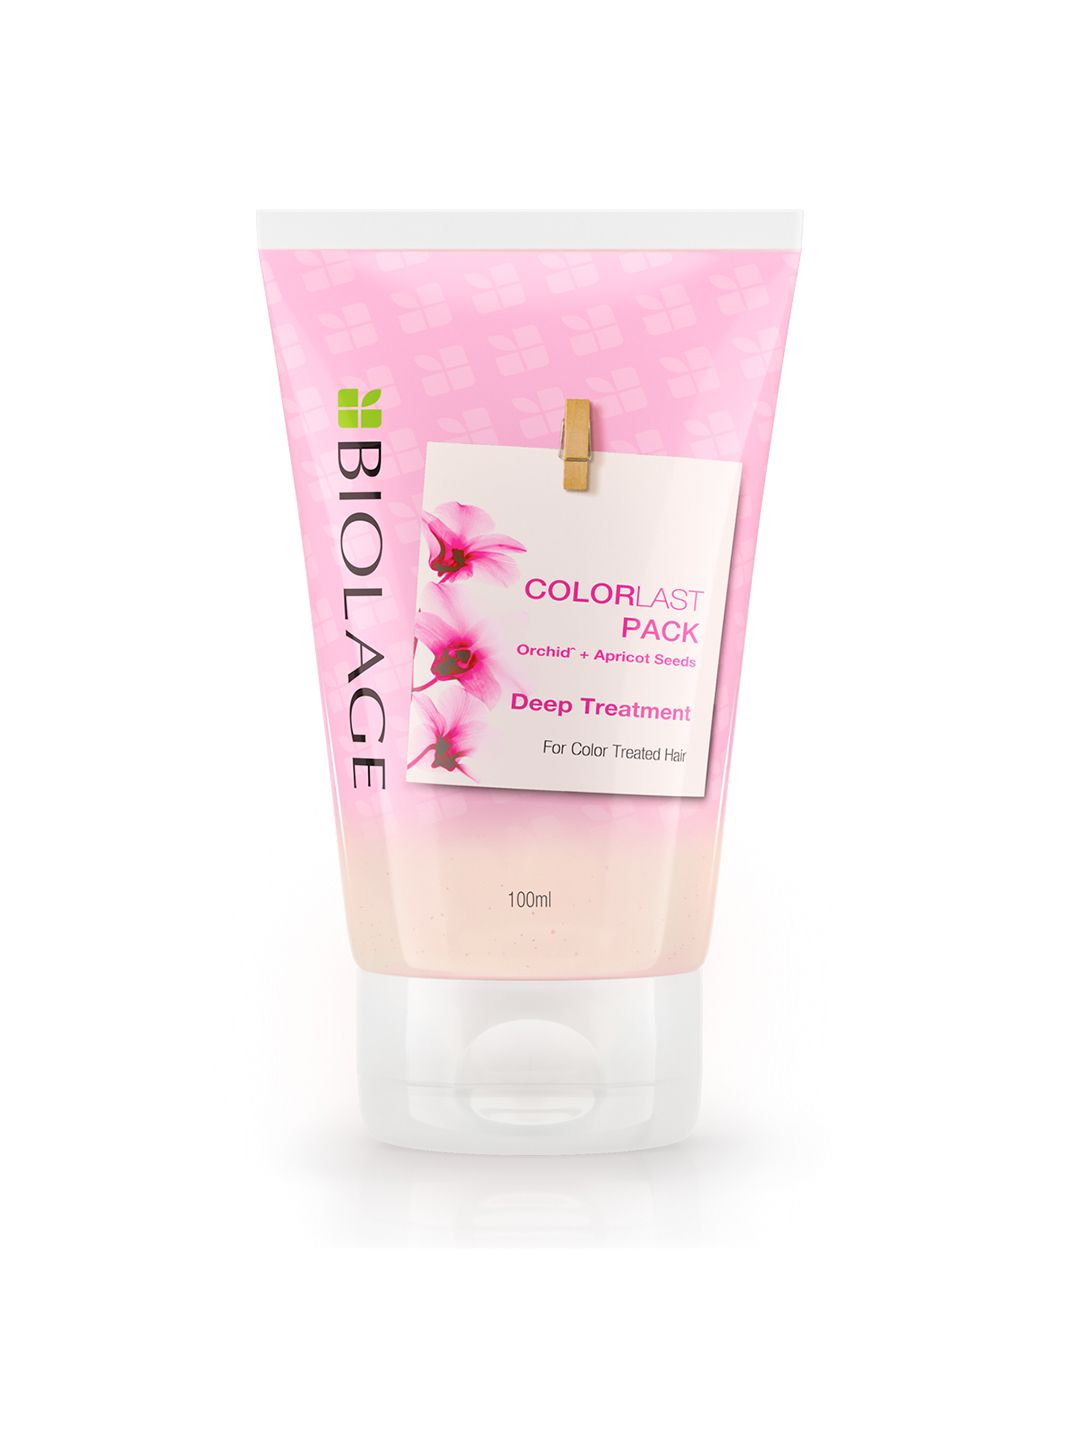 Biolage Color Last Orchid & Apricot Seeds Deep Treatment Hair Pack - 100 ml Price in India